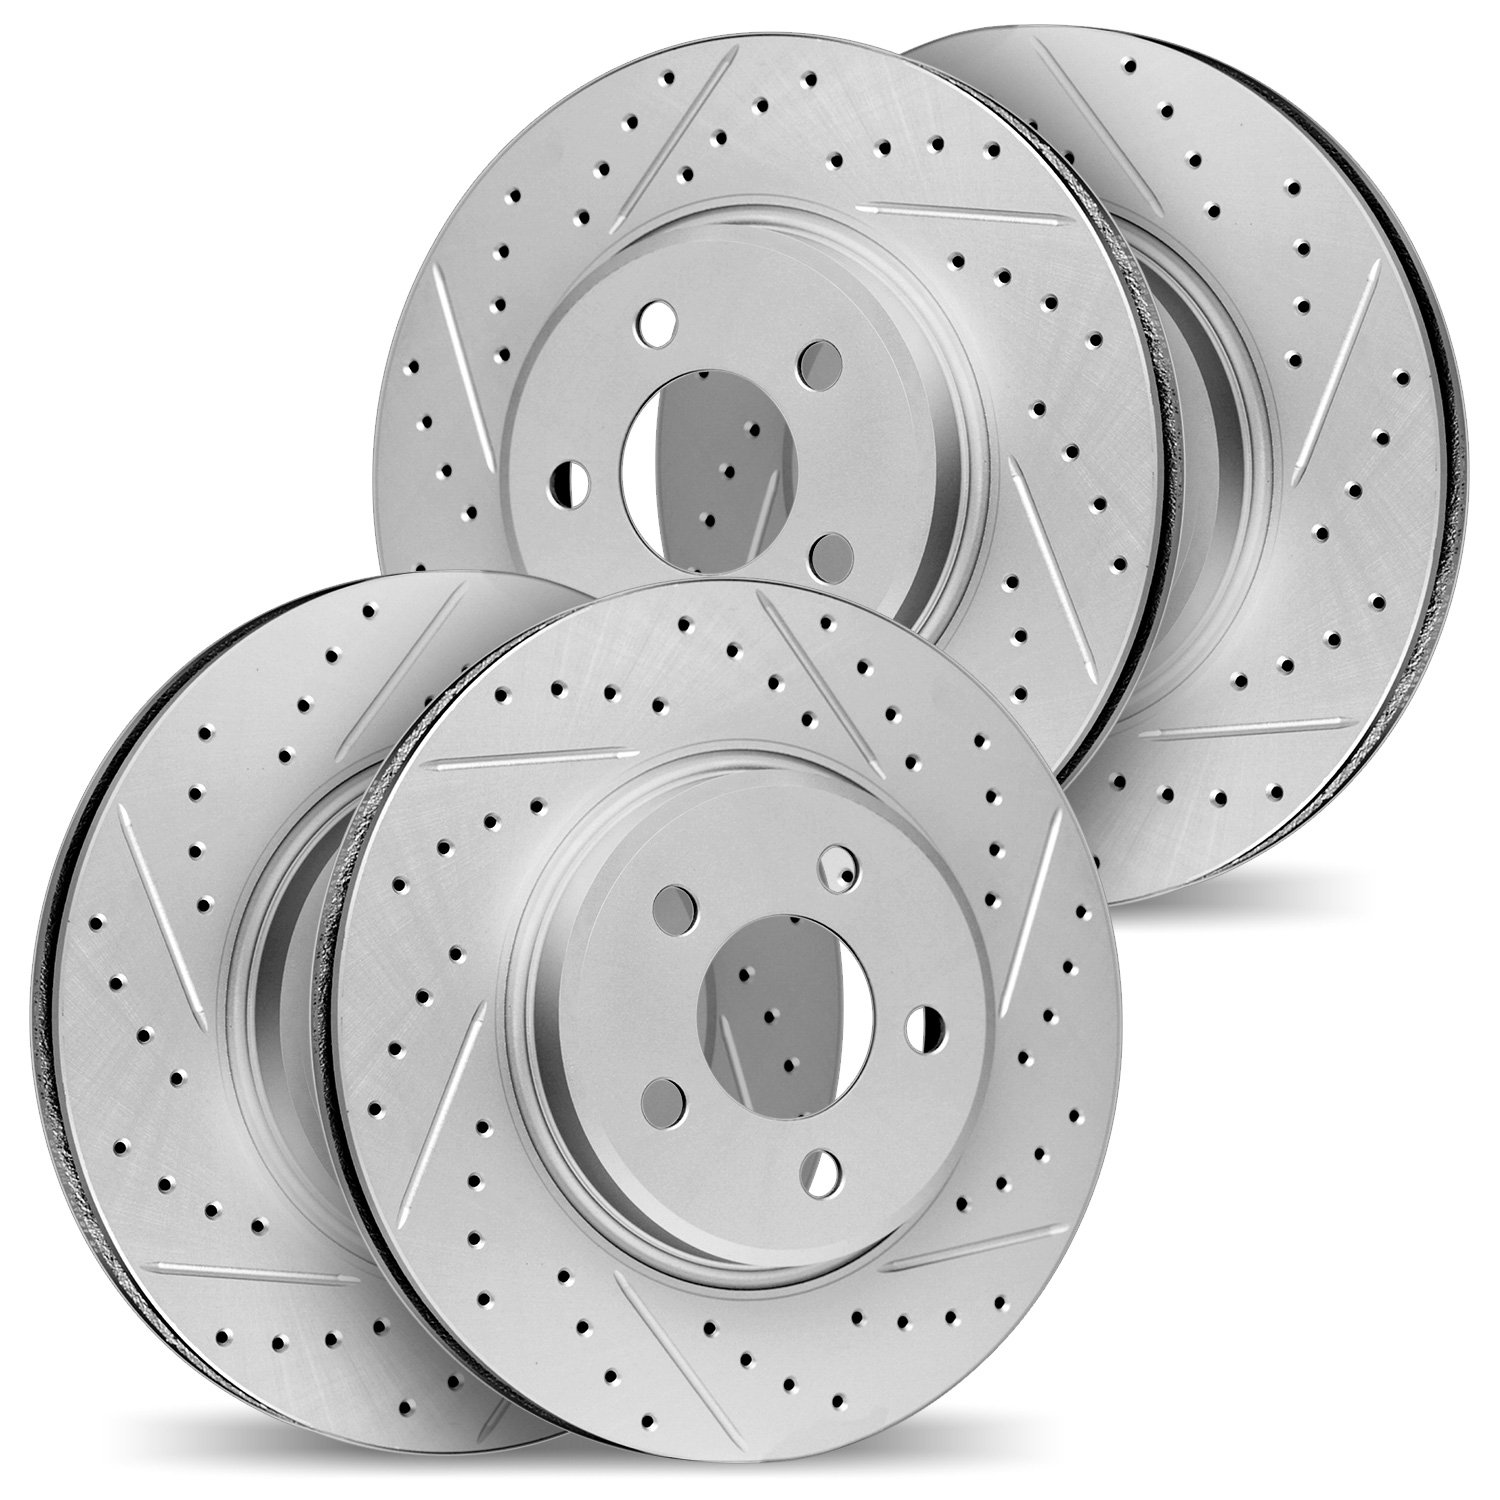 2004-76049 Geoperformance Drilled/Slotted Brake Rotors, Fits Select Lexus/Toyota/Scion, Position: Front and Rear